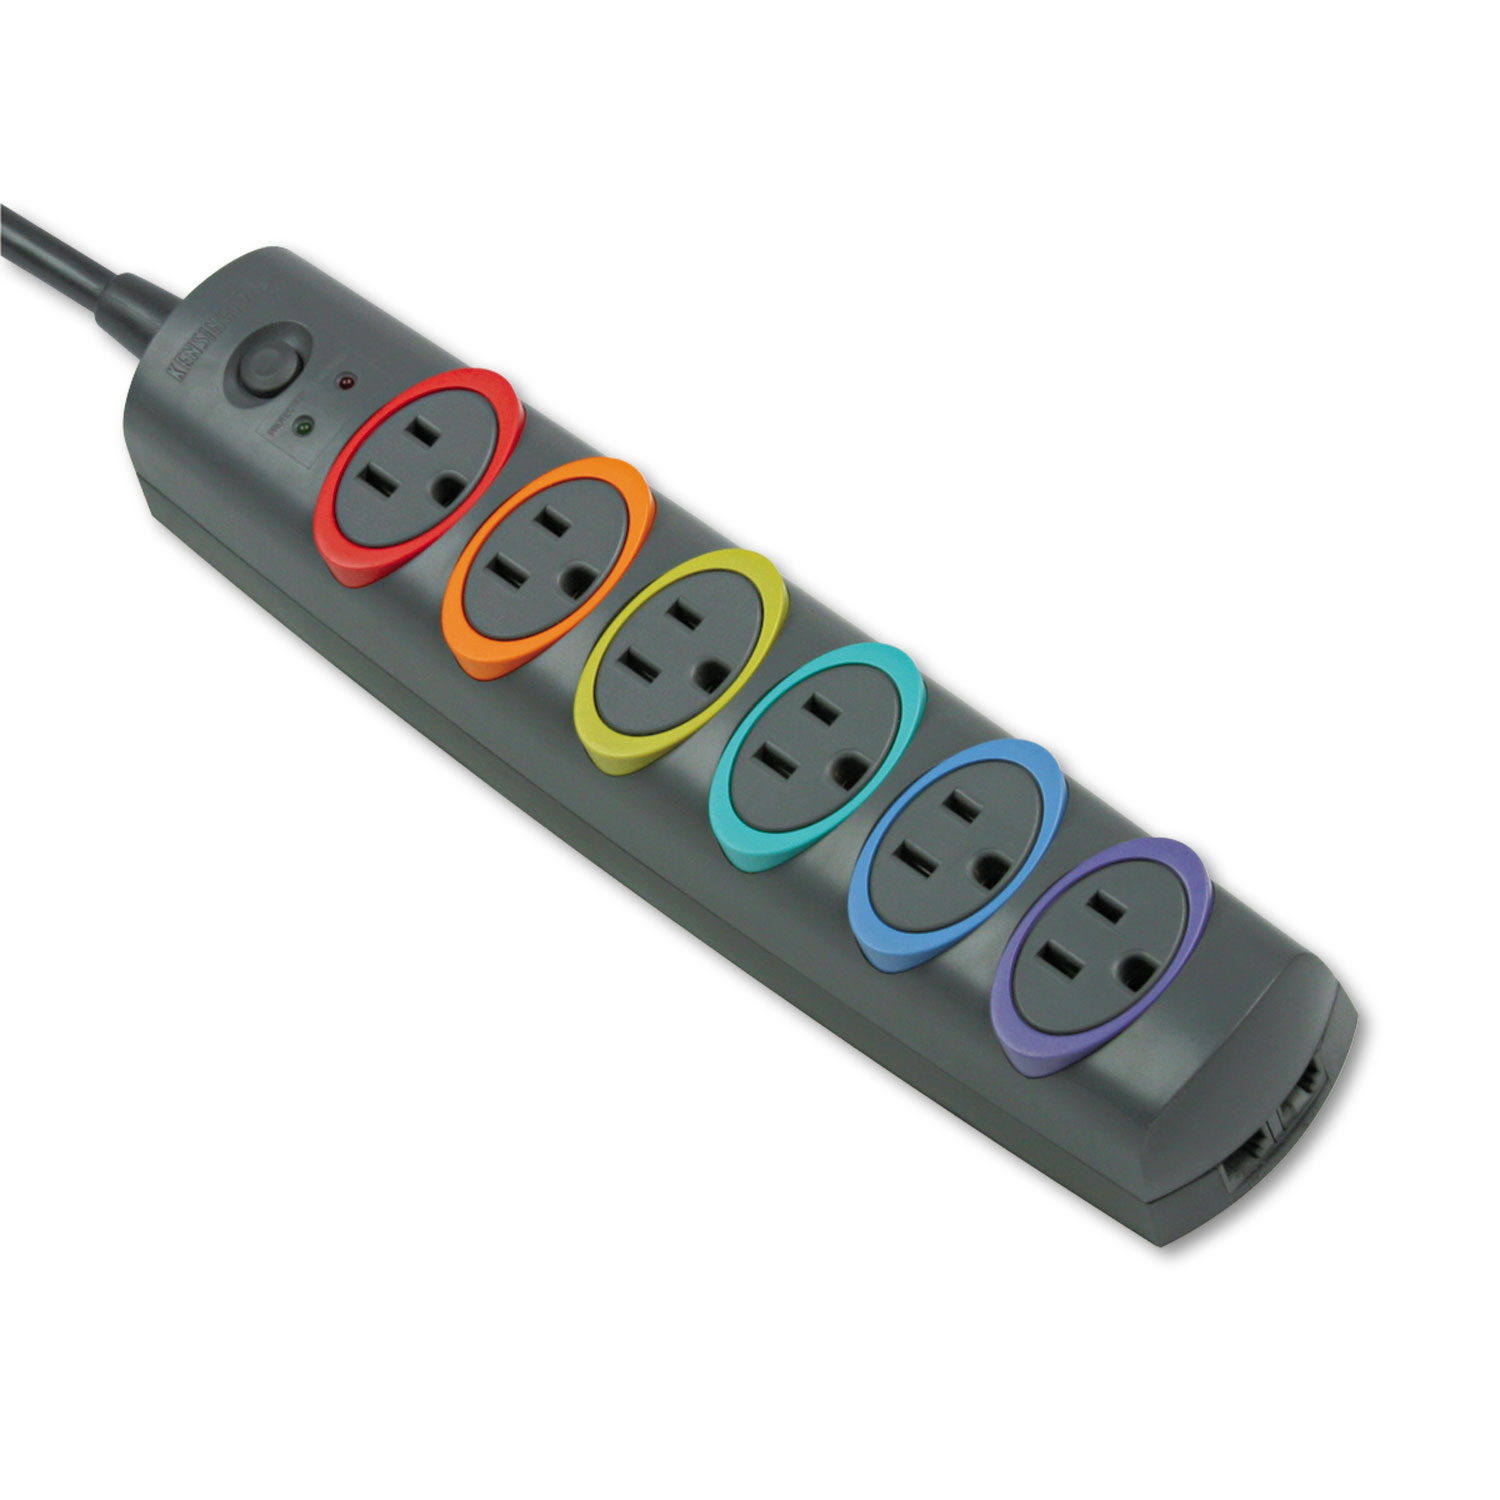  Kensington K62144NA SmartSockets Color-Coded Strip Surge Protector, 6 Outlets, 8ft Cord, 1260 Joules (KMW62144) 